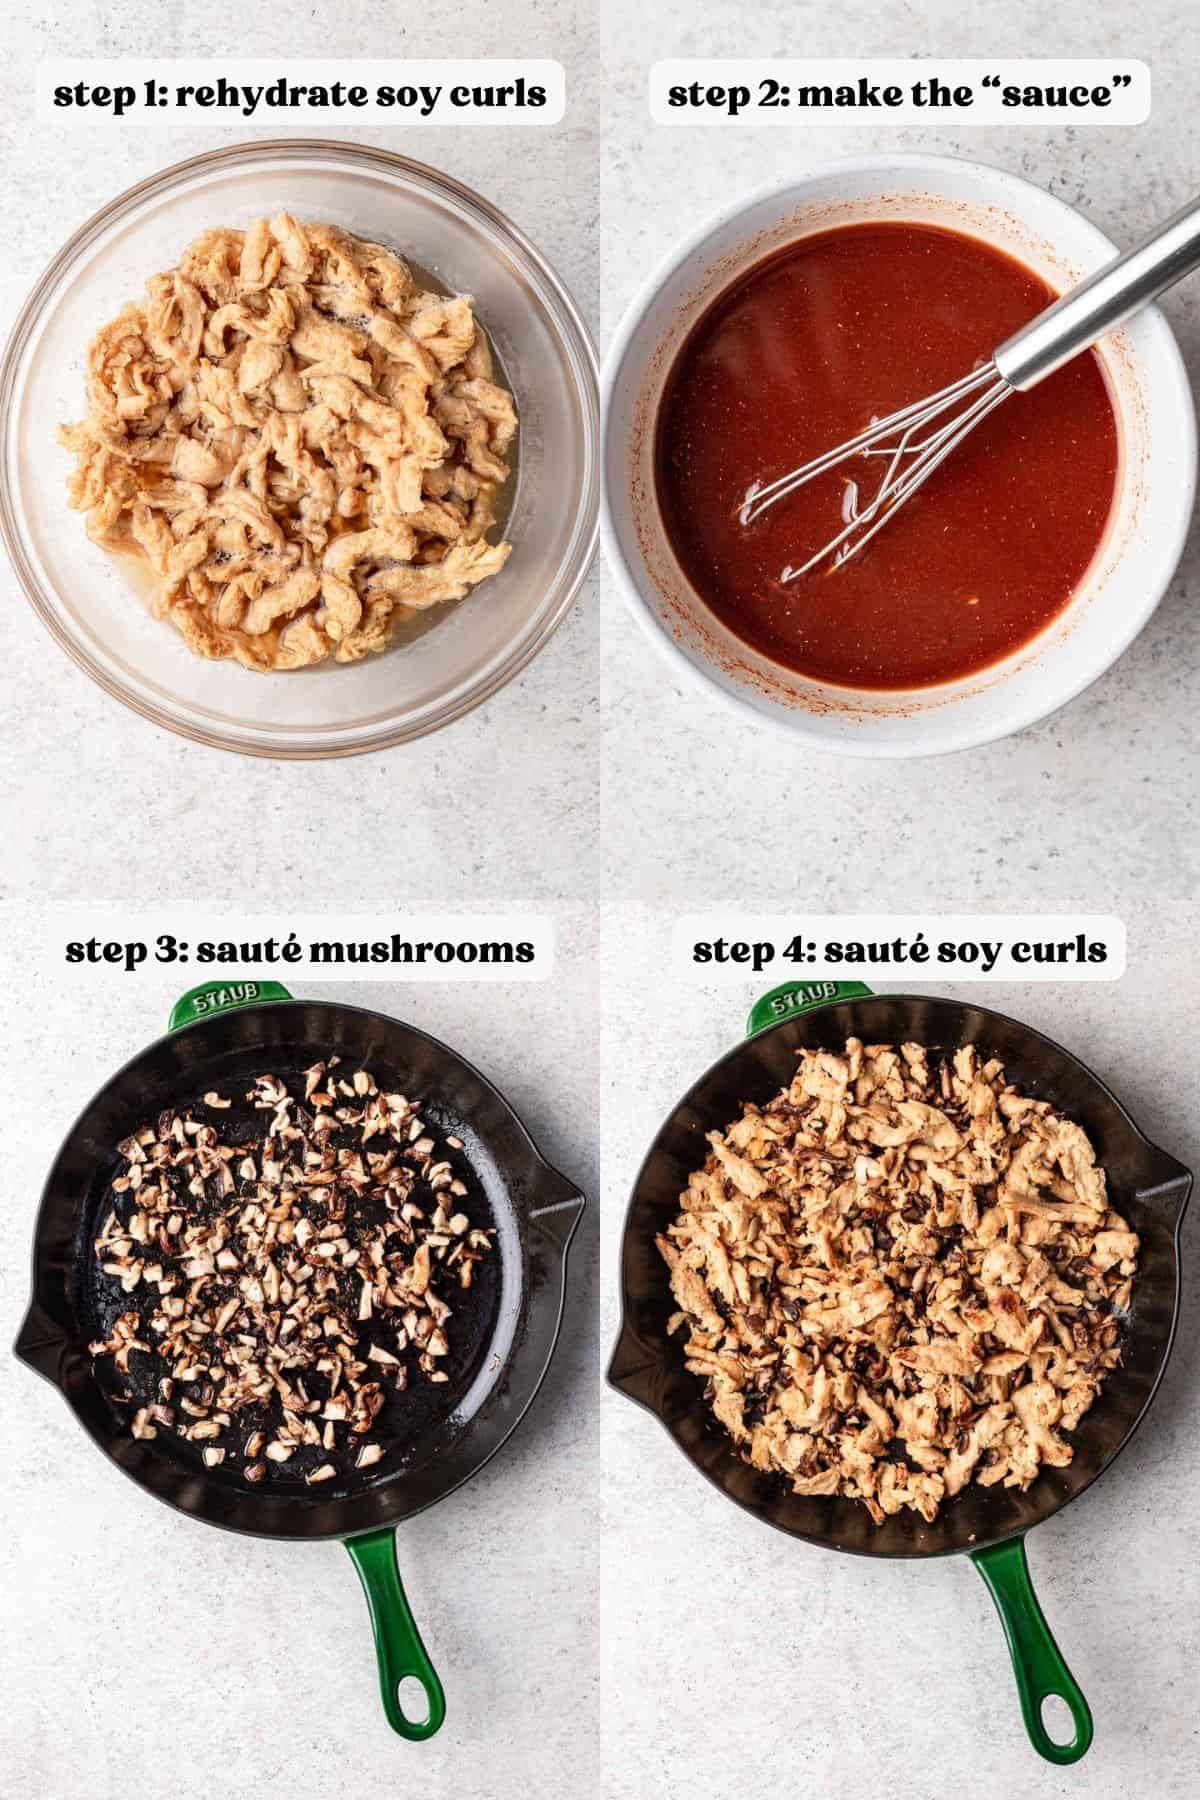 Step by step instructions showing how to rehydrate soy curls, make "beef" sauce, and sauté the mushrooms.